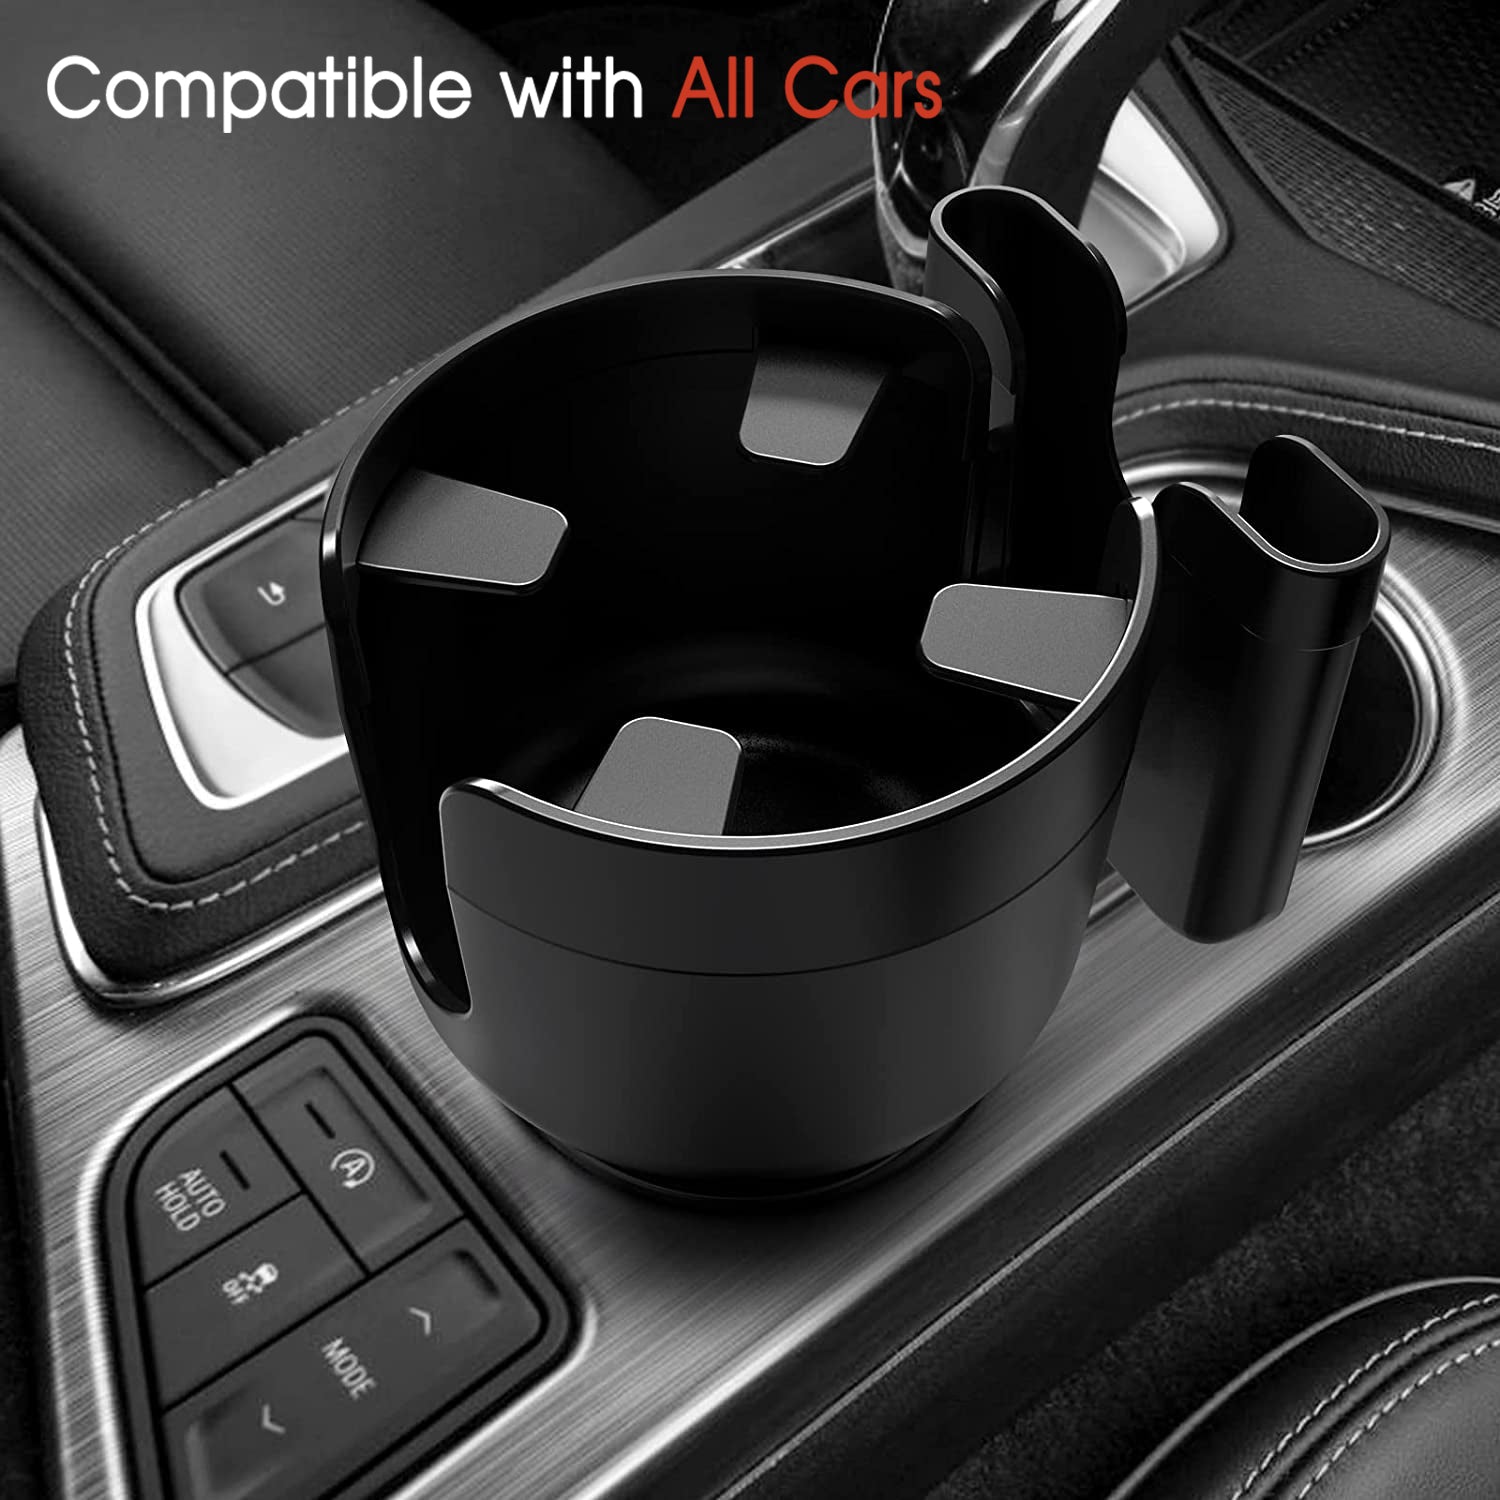 Custom Text For Car Cup Holder 2-in-1, Custom For Your Cars, Car Cup Holder Expander Adapter with Adjustable Base, Car Cup Holder Expander Organizer with Phone Holder PE15988